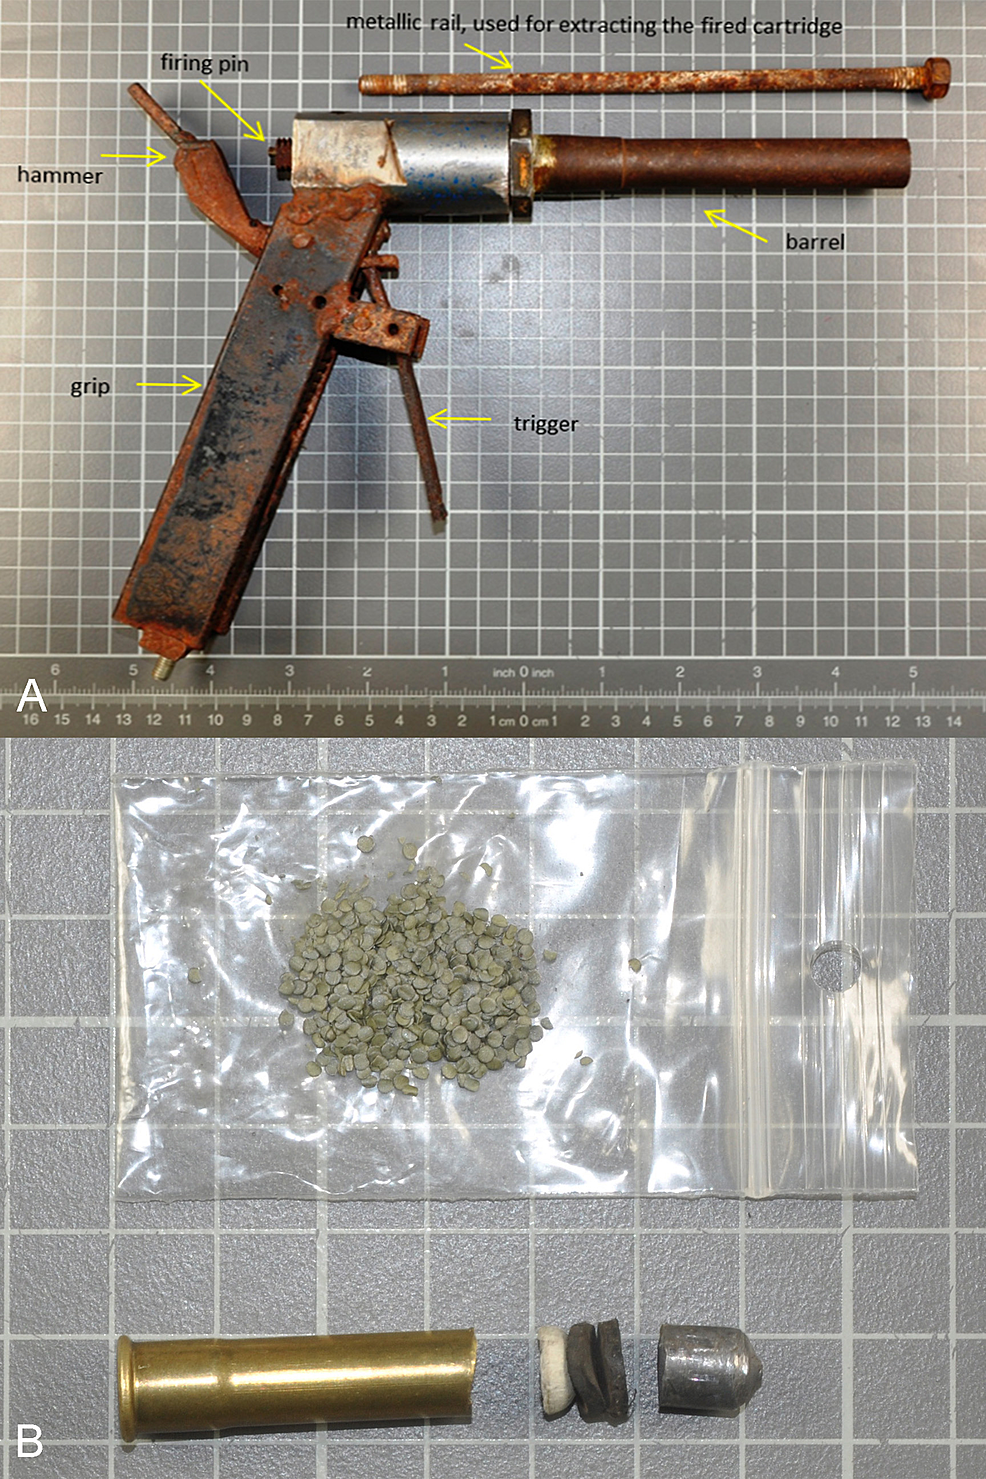 (A)-The-homemade-gun.-(B)-The-modified-9mm-Flobert-cartridge-recovered-at-the-scene-(disassembled).